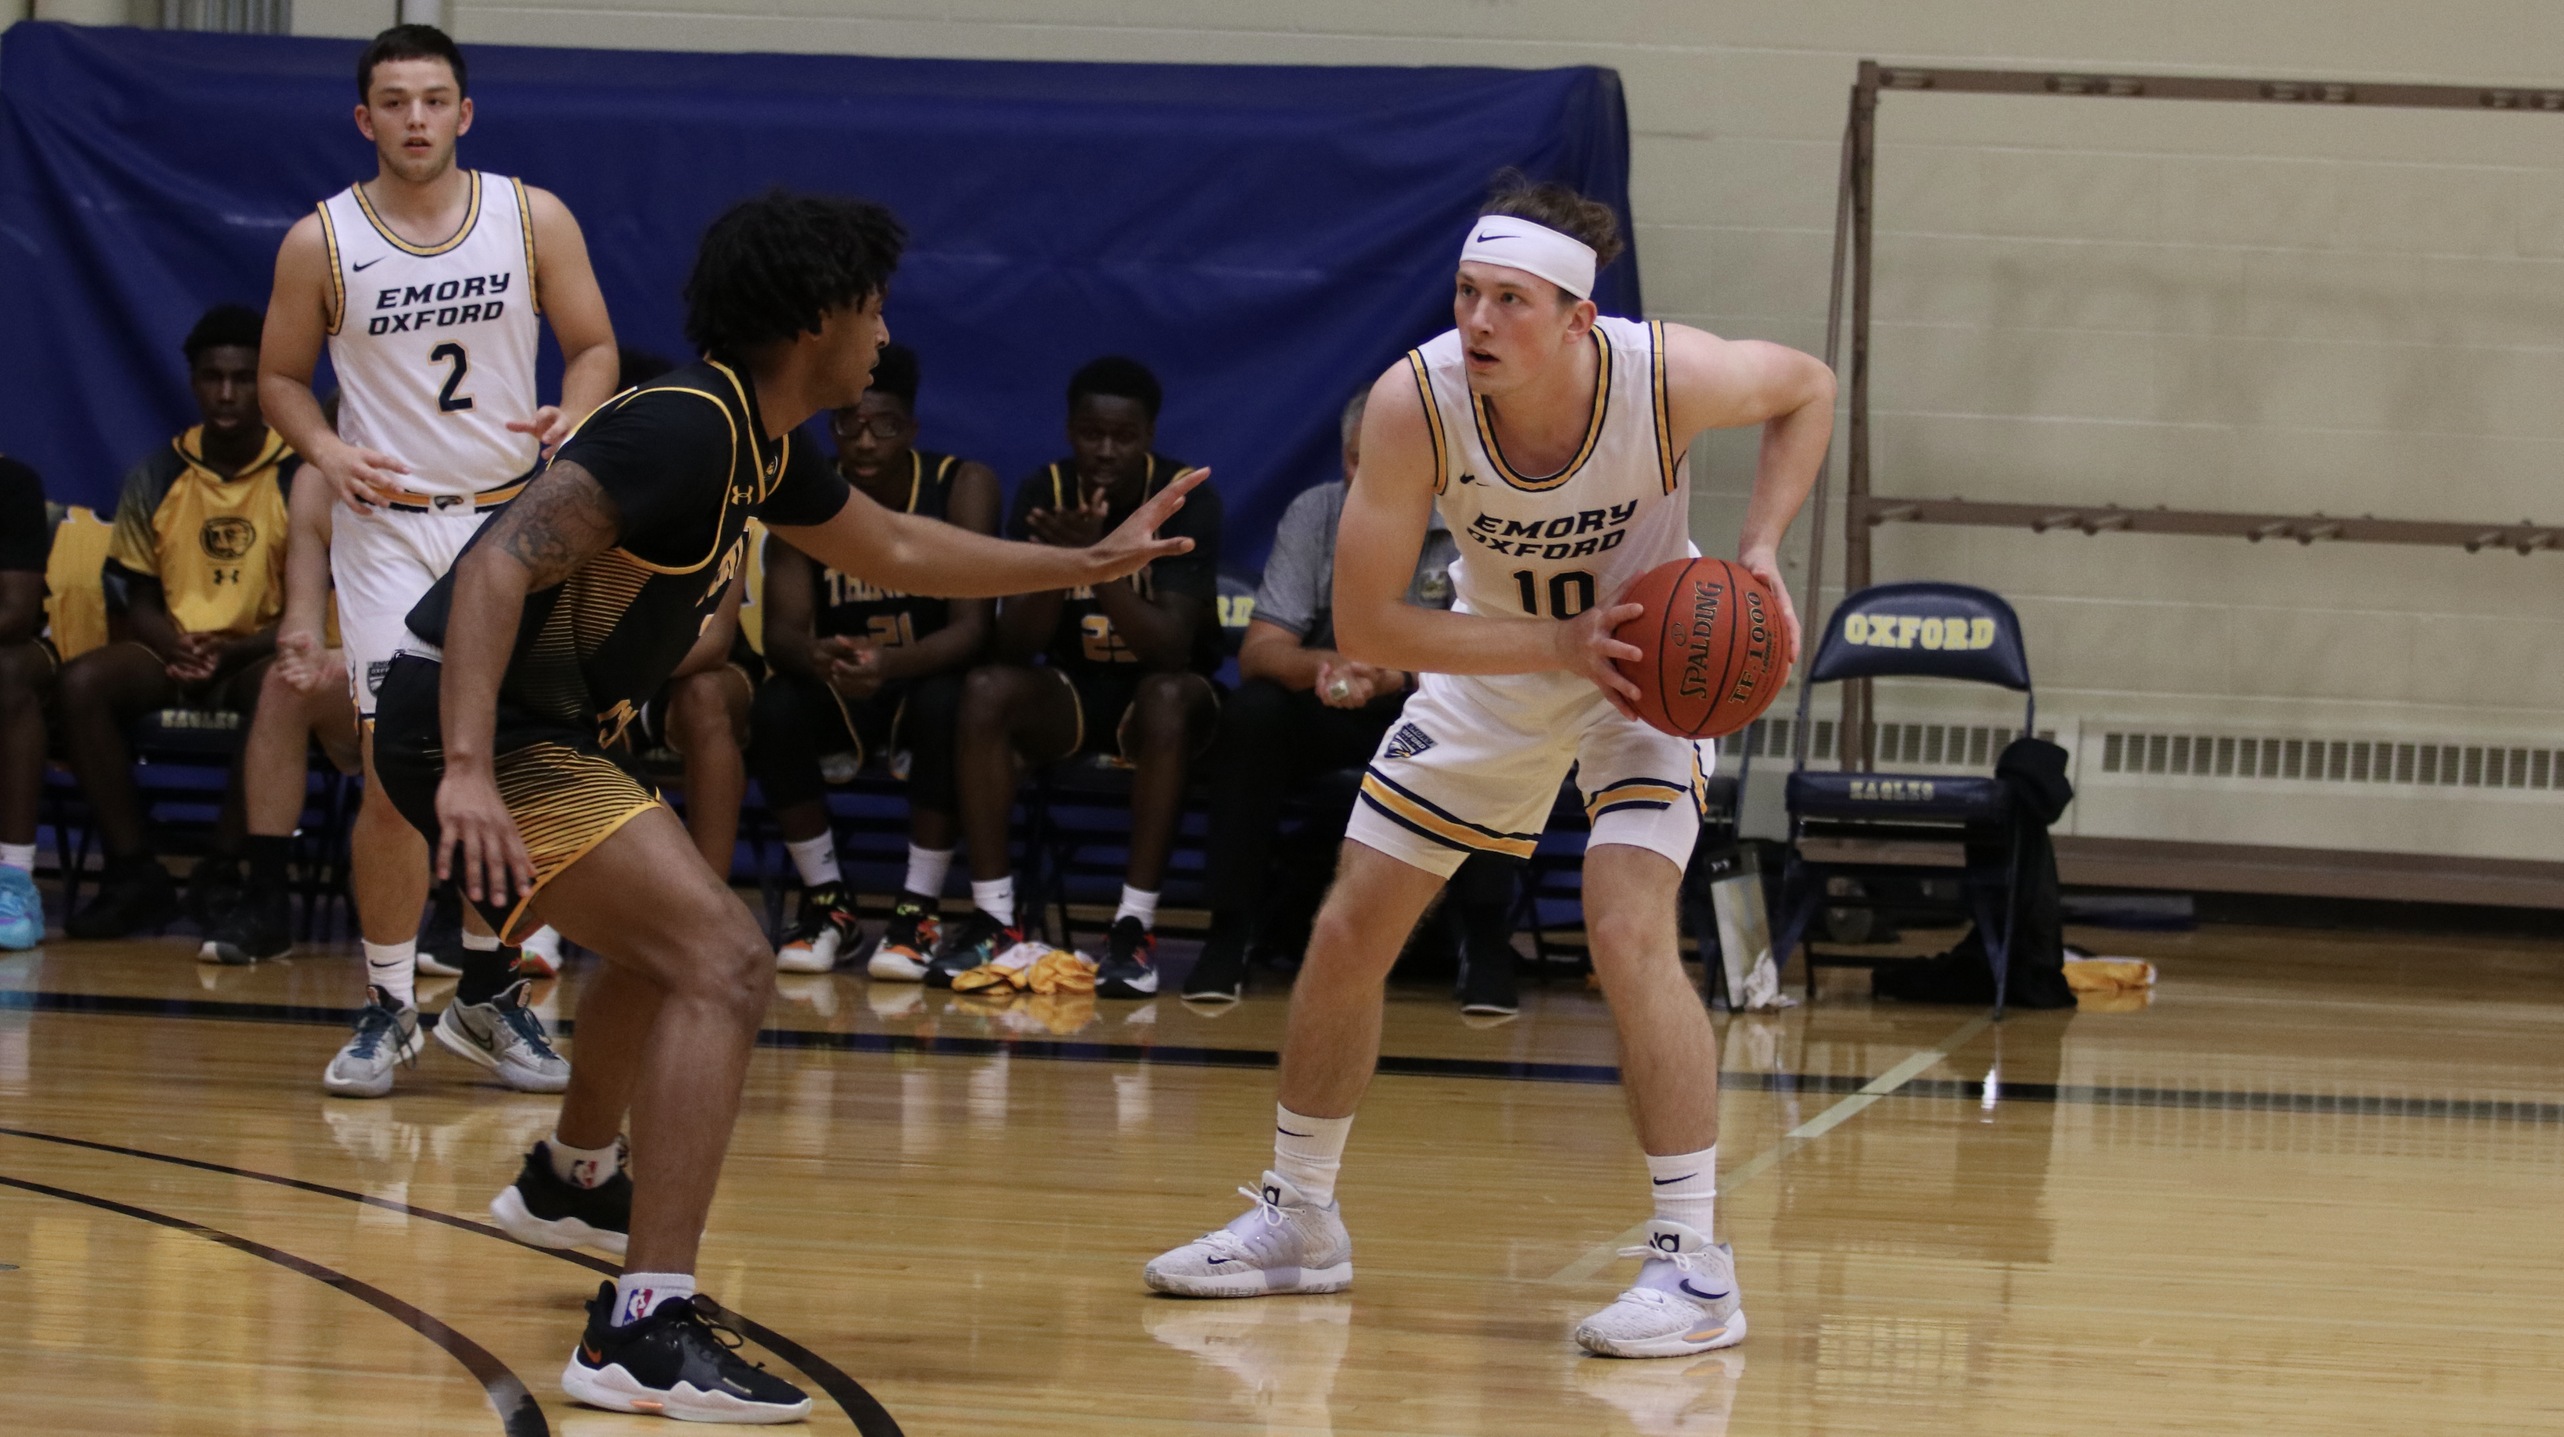 Stormy Petrels Down Emory Oxford in Crosstown Matchup